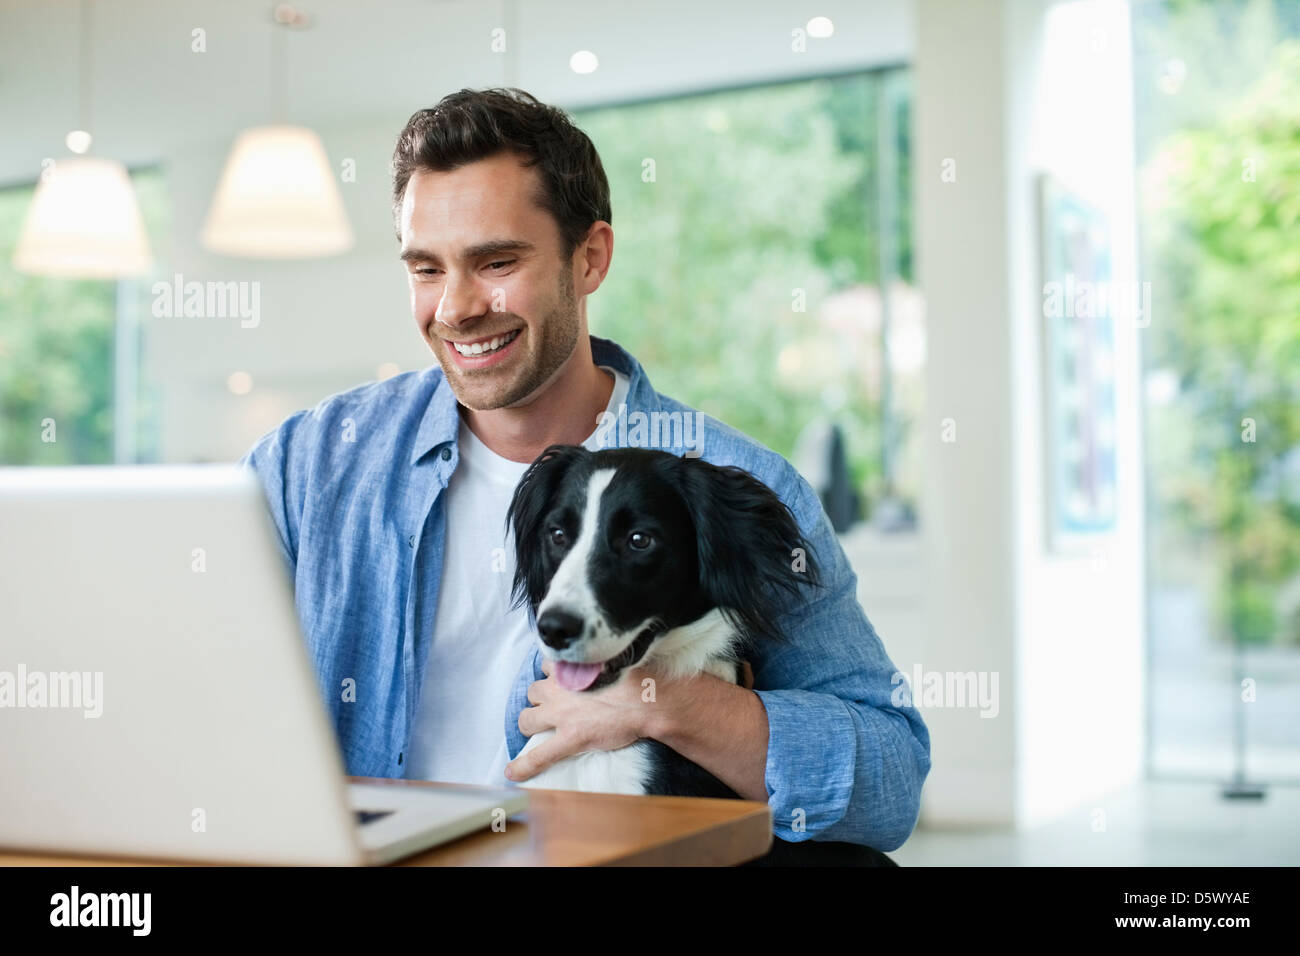 Man with dog on lap using laptop Banque D'Images